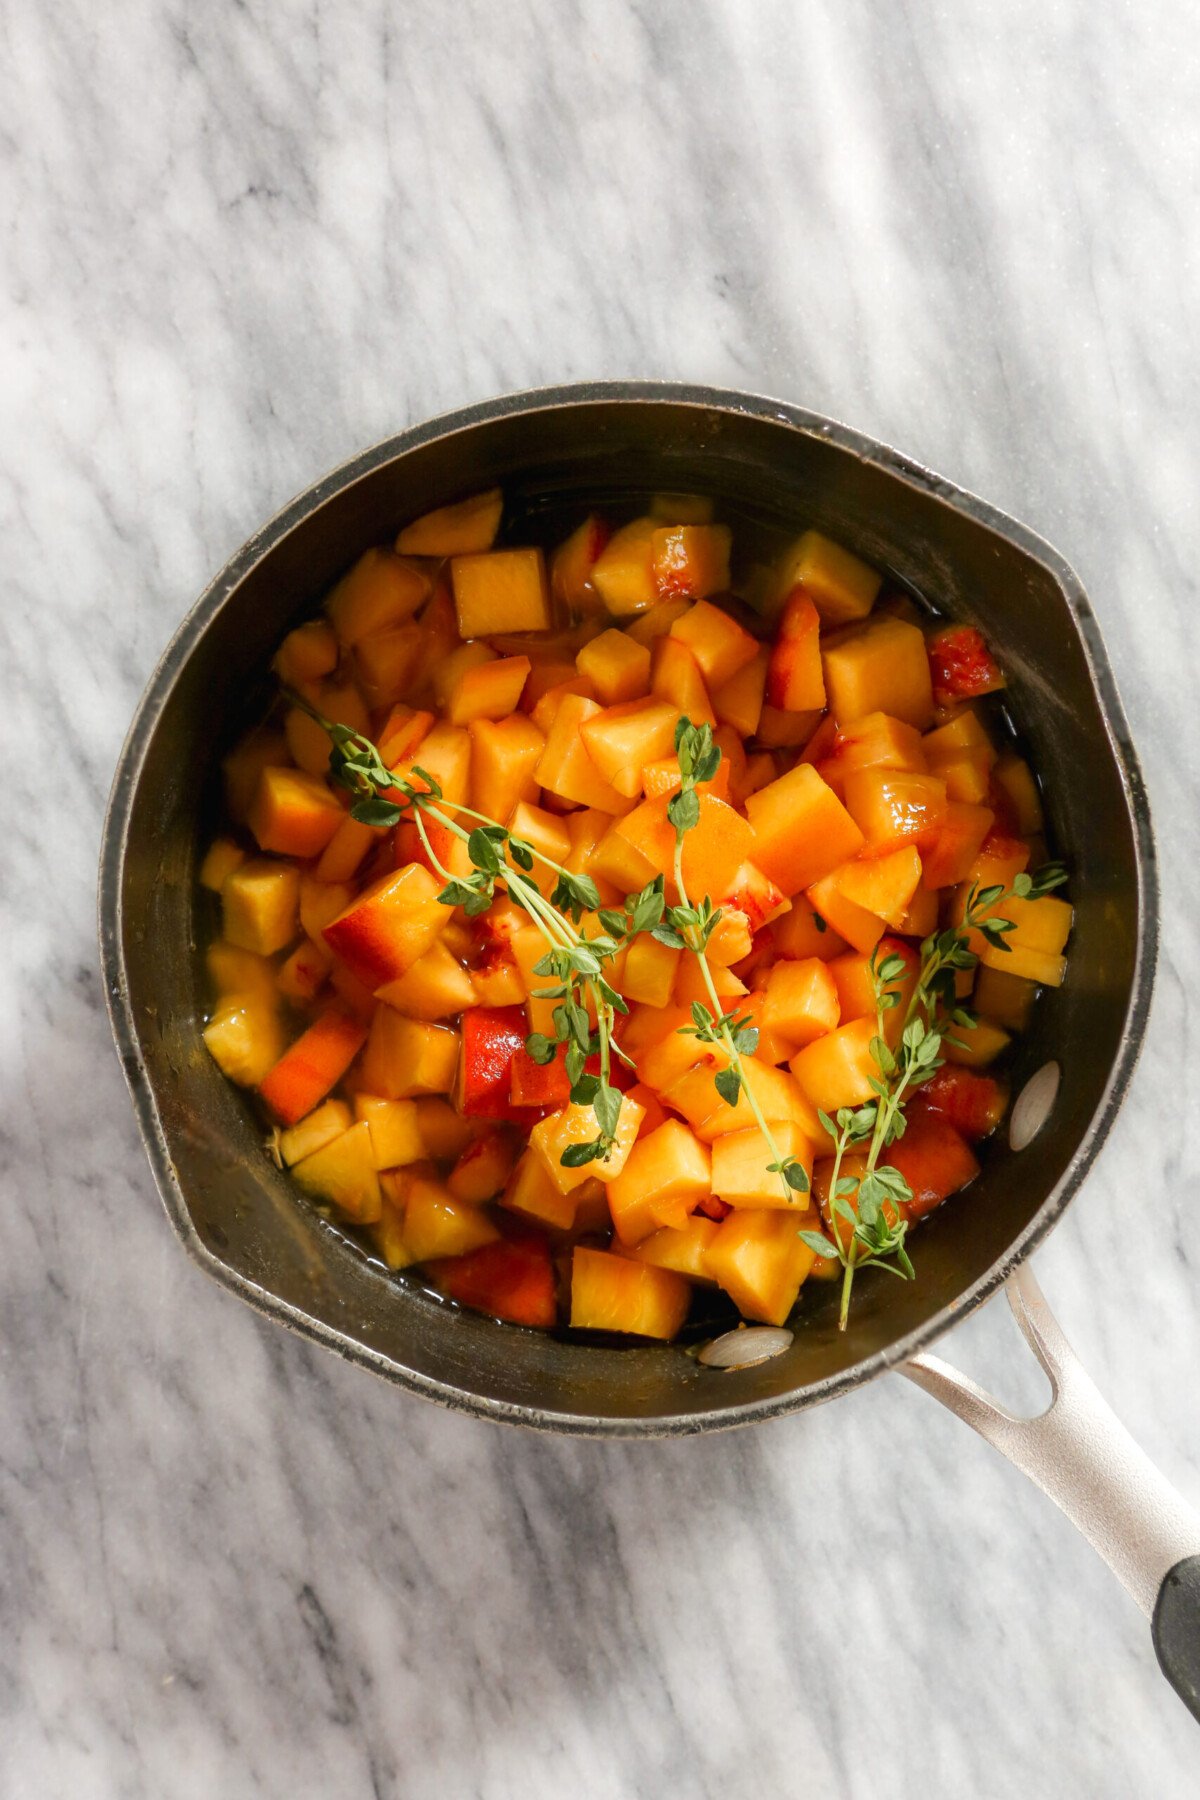 Diced peaches and fresh thyme sprigs in a saucepan set on a marble surface.